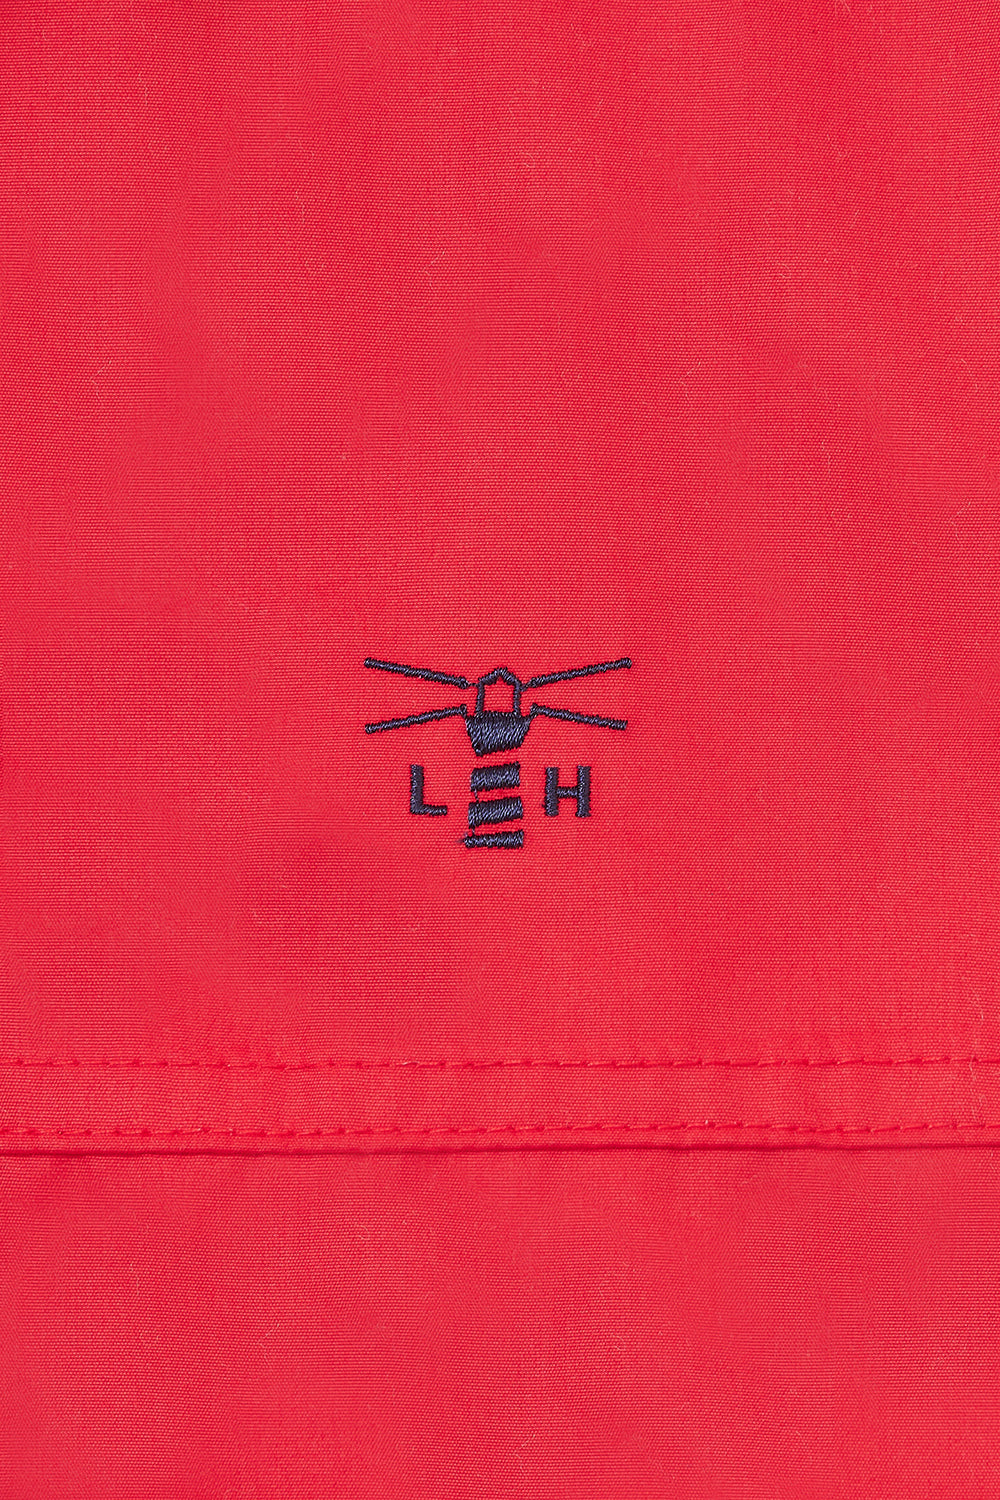 Women's waterproof Eva padded coat in Red from Lighthouse with embroidered chest logo.